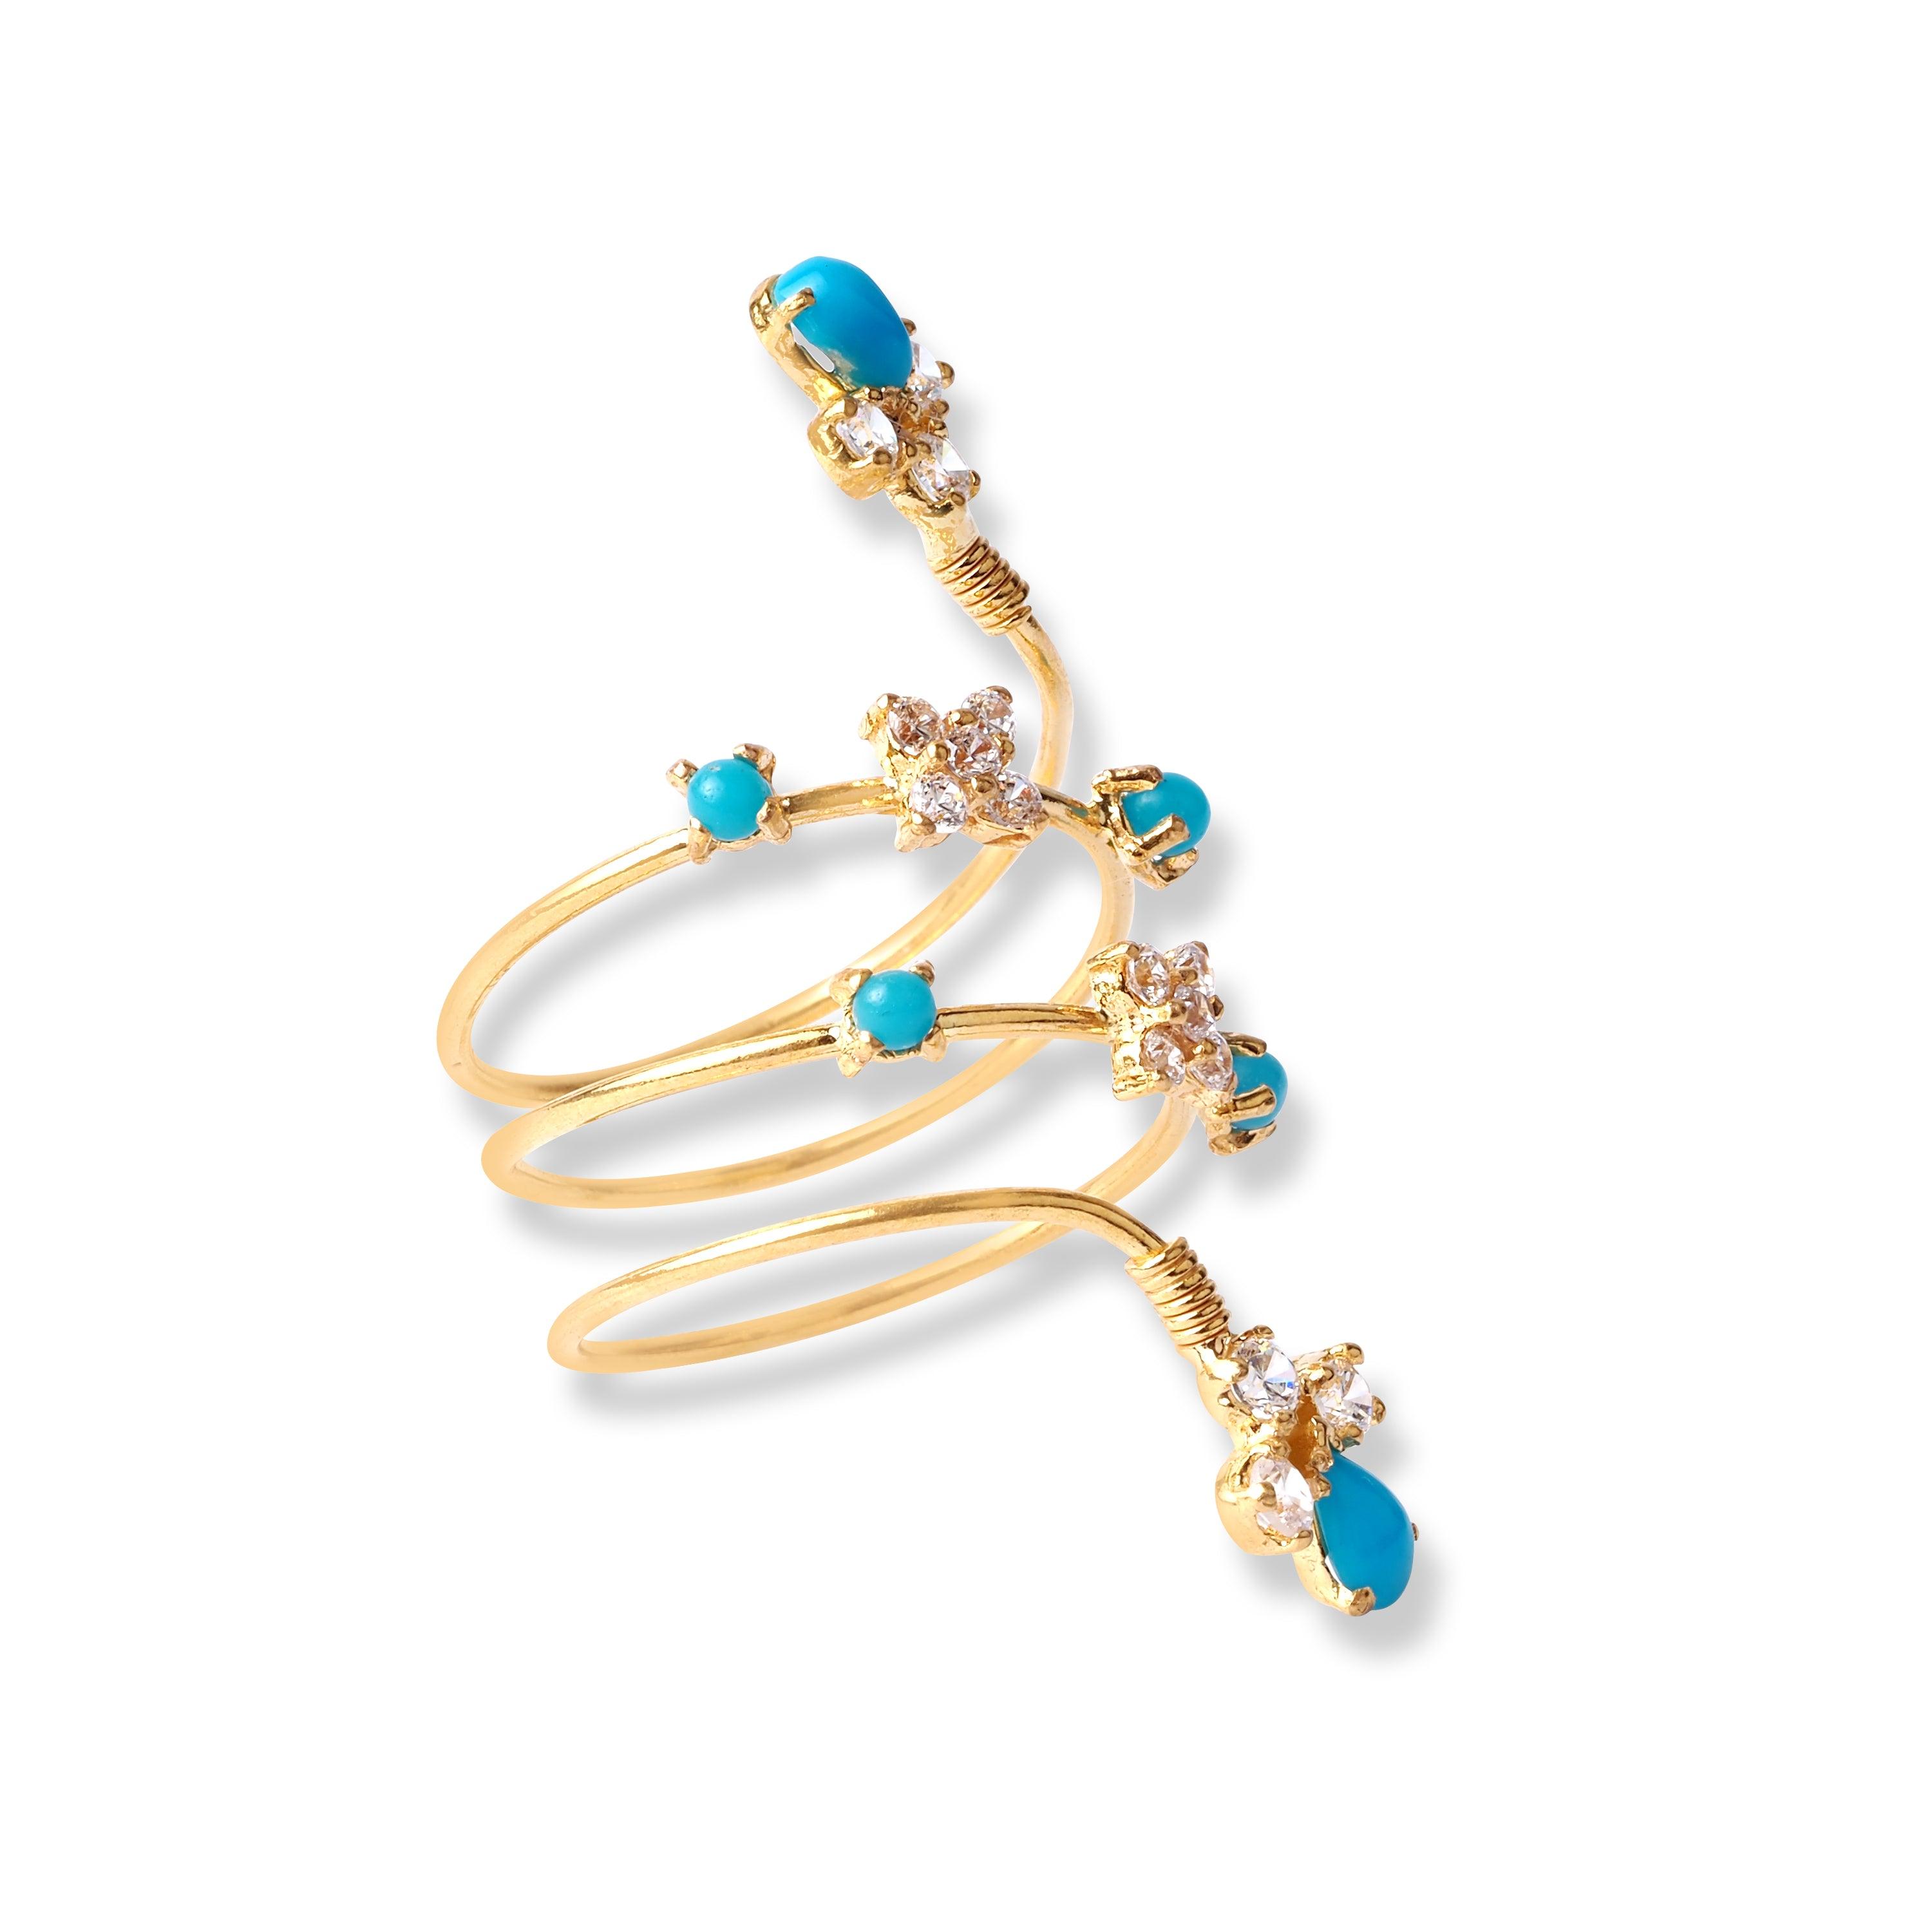 22ct Gold Spiral Ring With Cubic Zirconia and Turquoise Stones (4.4g) LR-6591 - Minar Jewellers